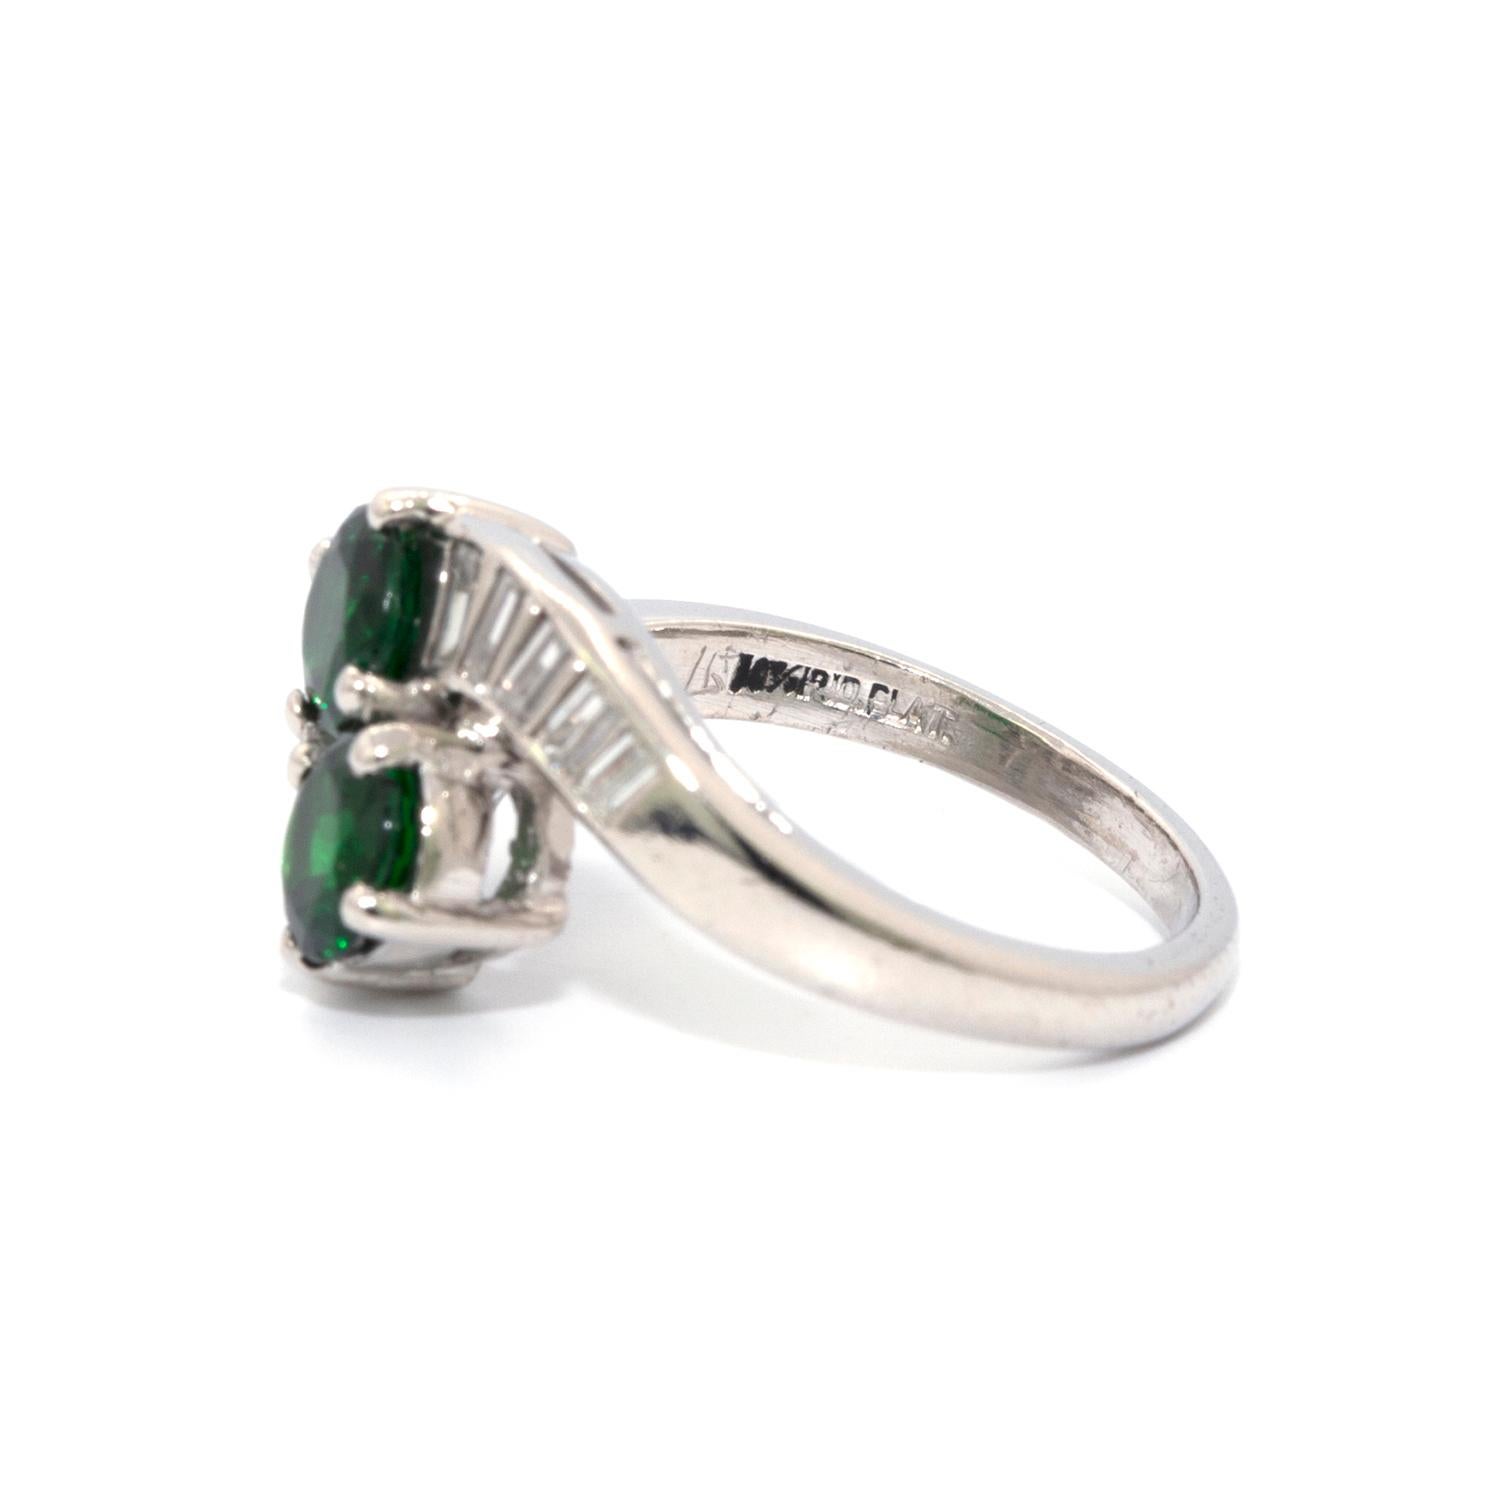 2 matching round Tsavorite Garnets with a total weight of 1.42 cts that are accented by 10 baguette shaped diamonds, that weigh 0.50cts in total and are set in a platinum wrap-a-round Estate ring. Size 5 3/4 Complimentary sizing 
